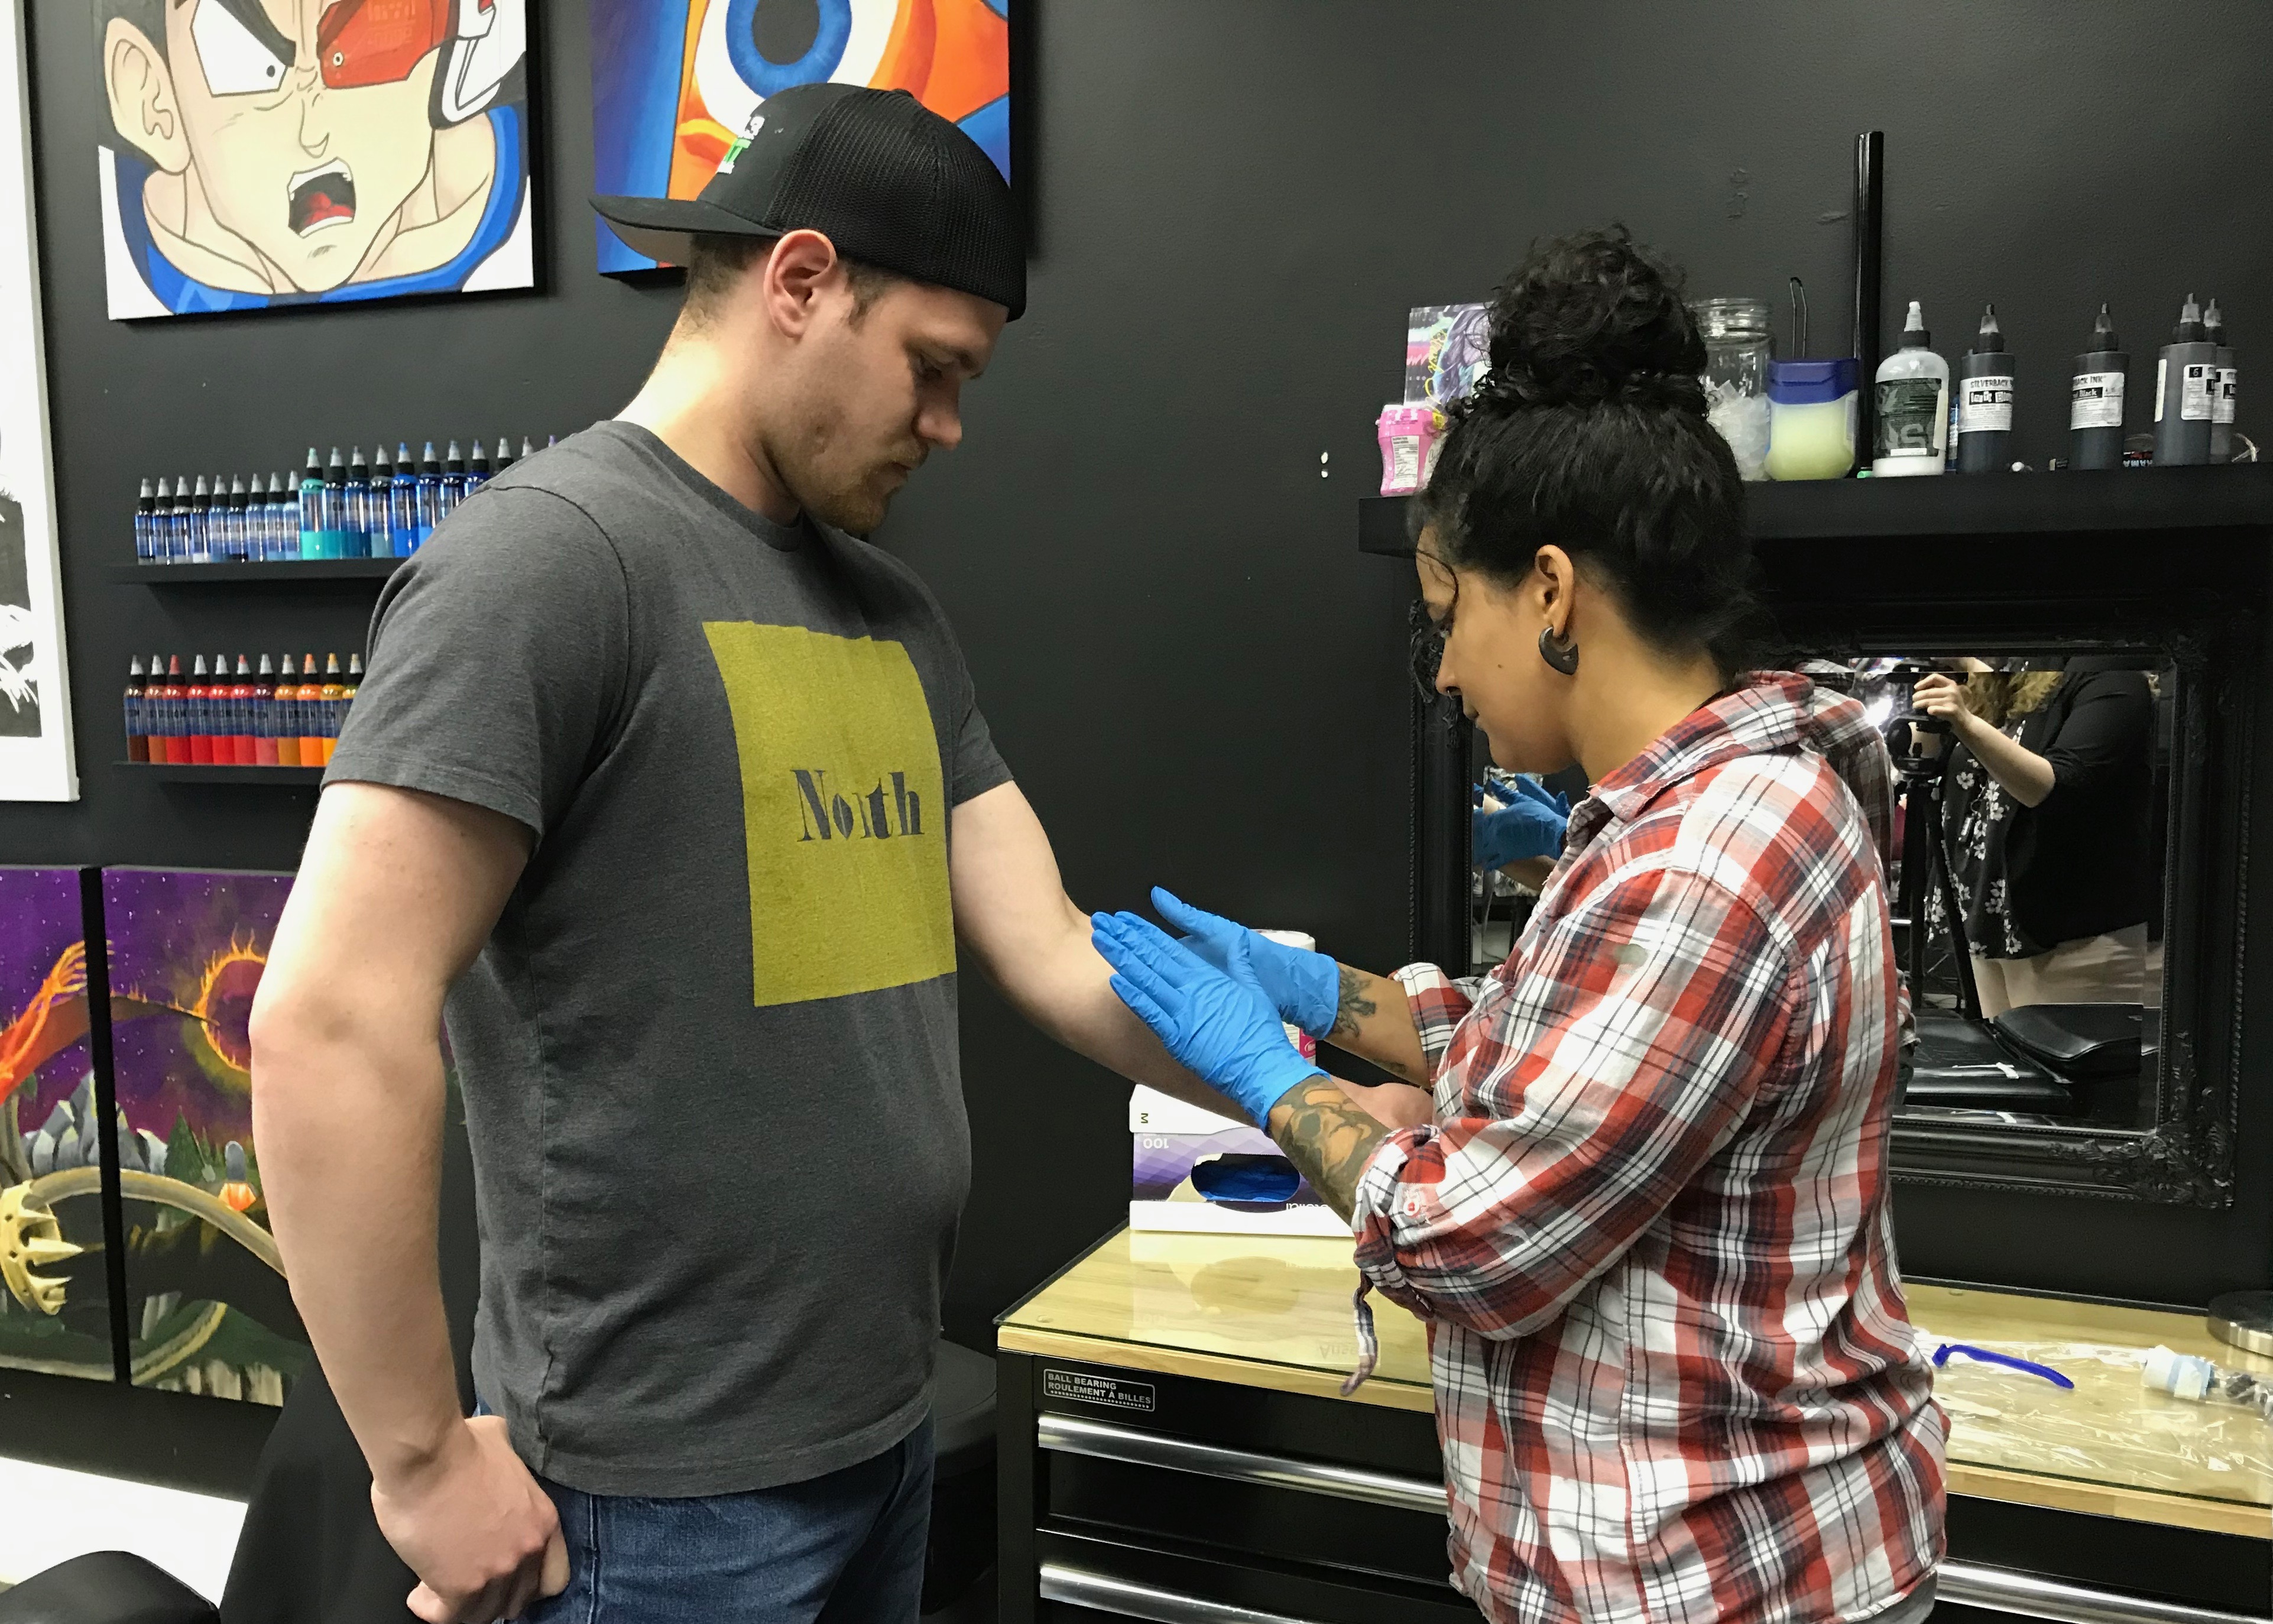 Tattoo art in PG helps advocate for men's mental health - My Prince George  Now